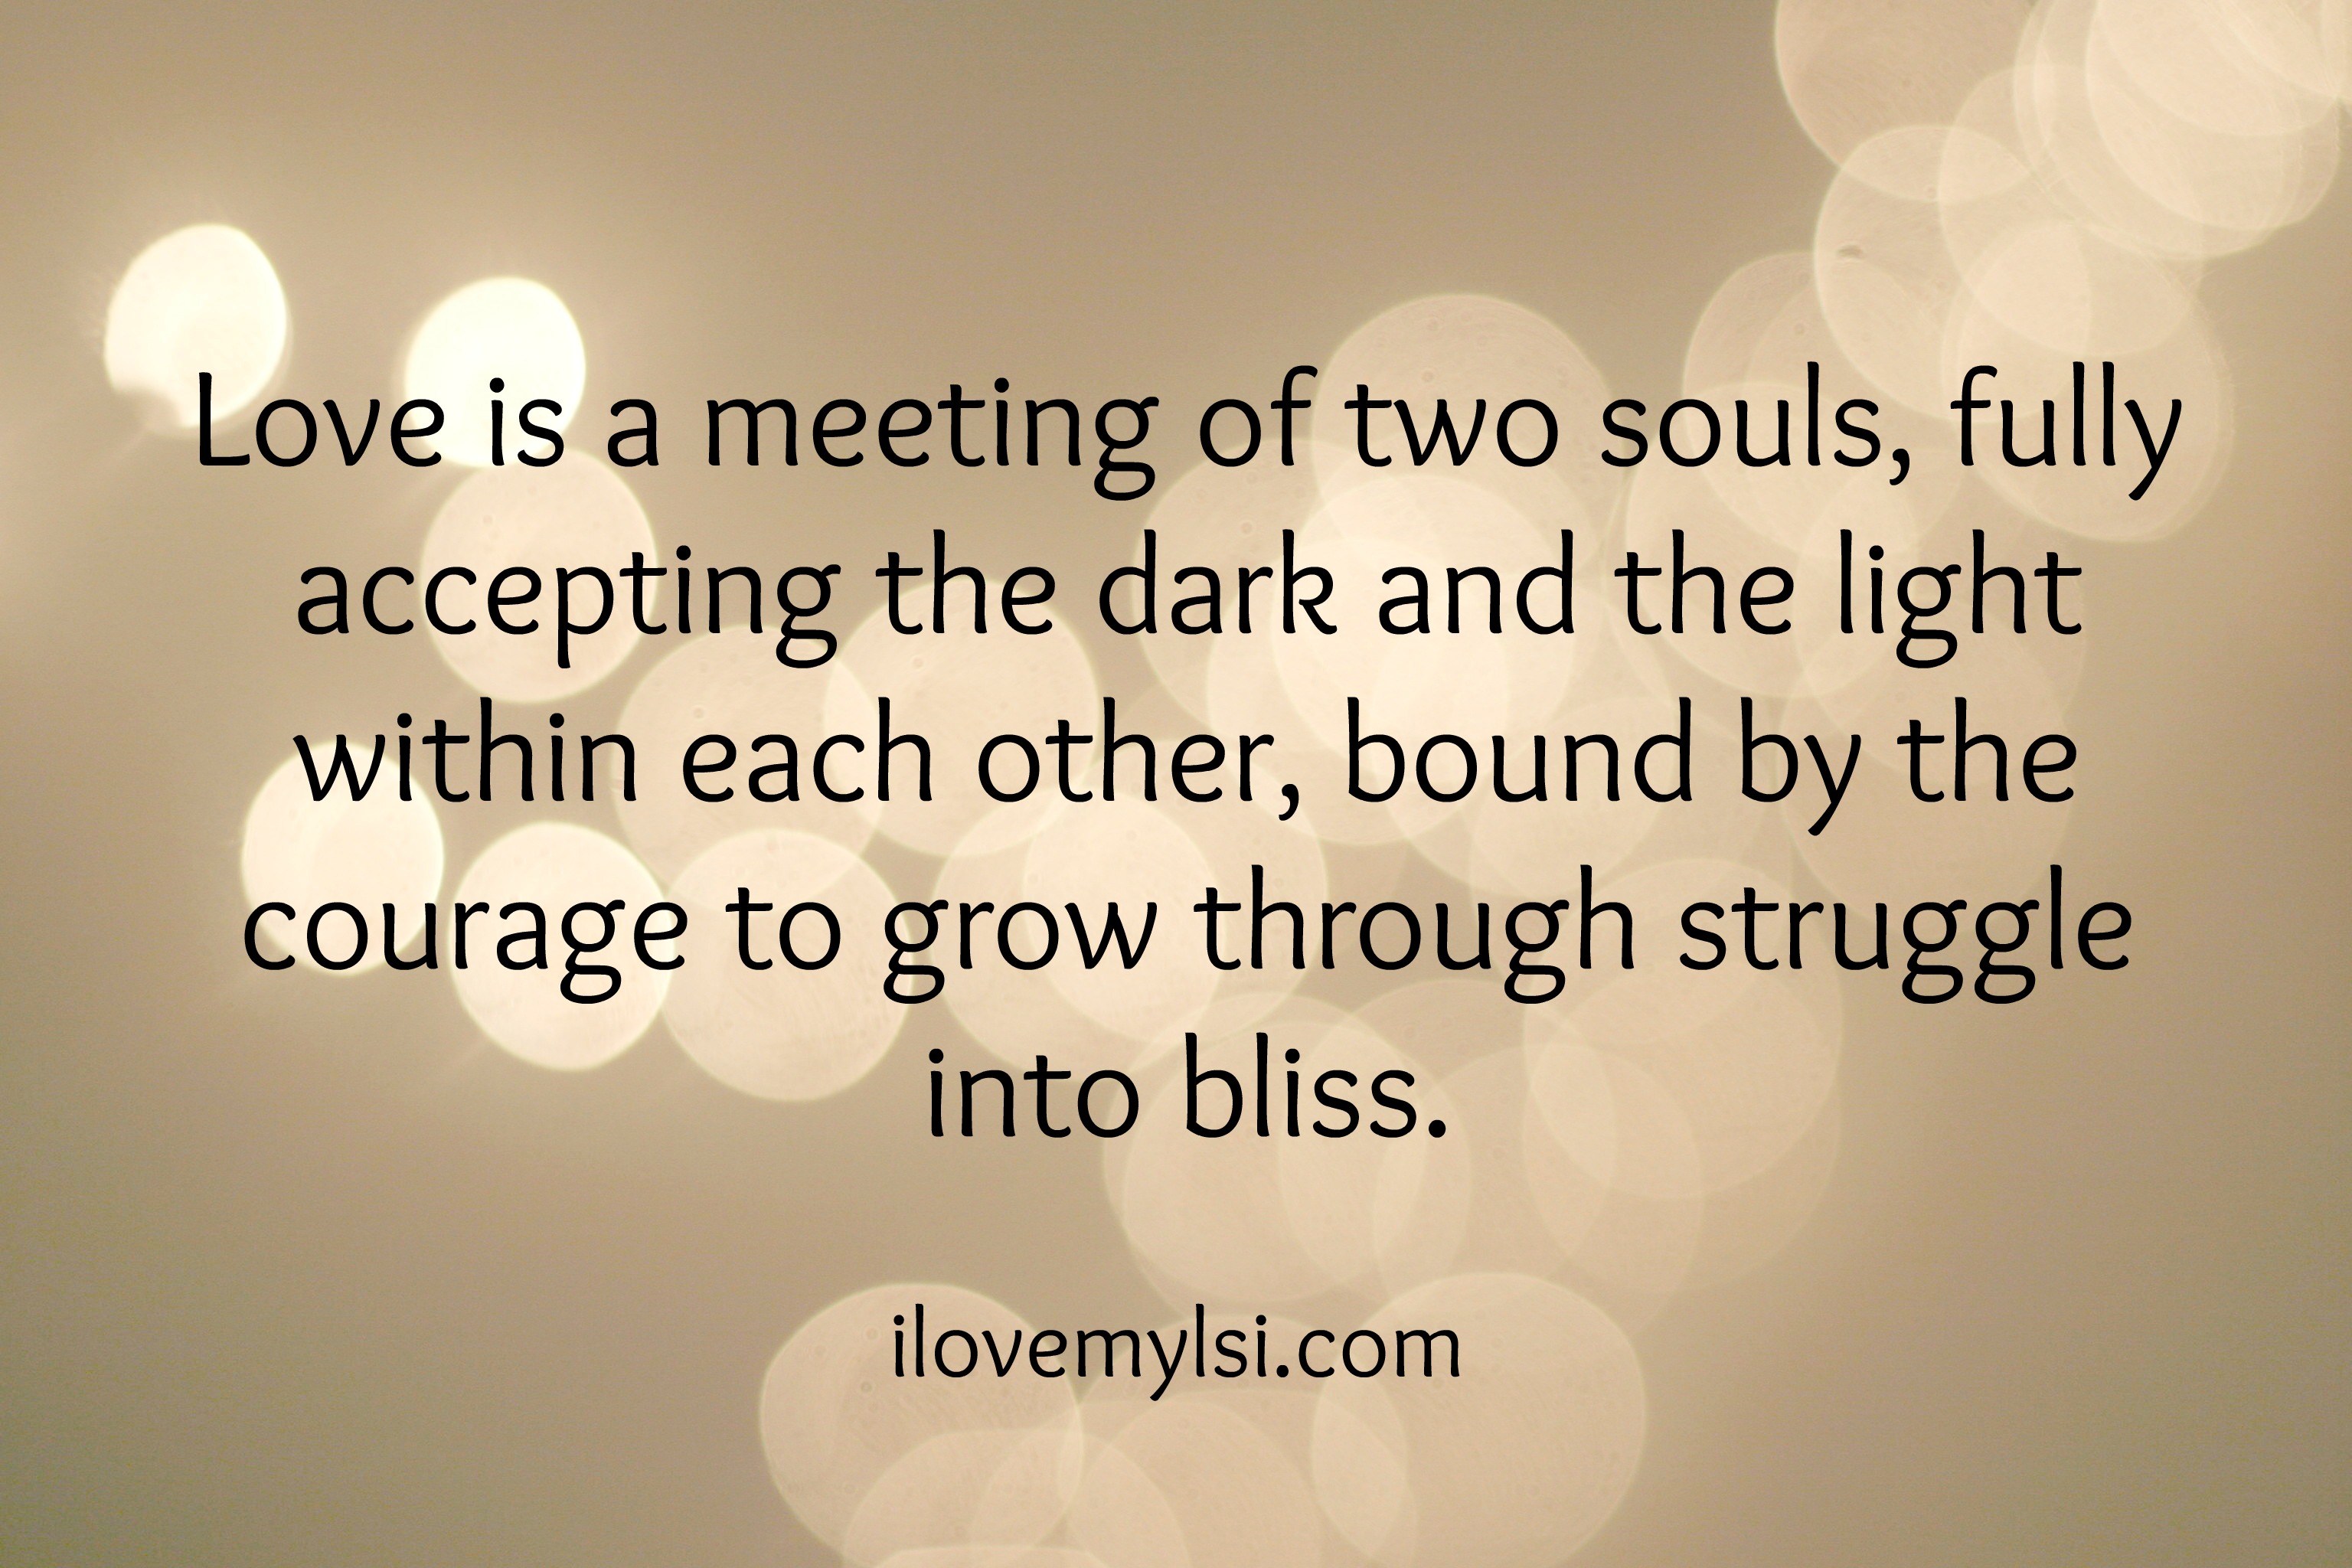 171616537 love is meeting of two souls fully accepting the dark fate quote